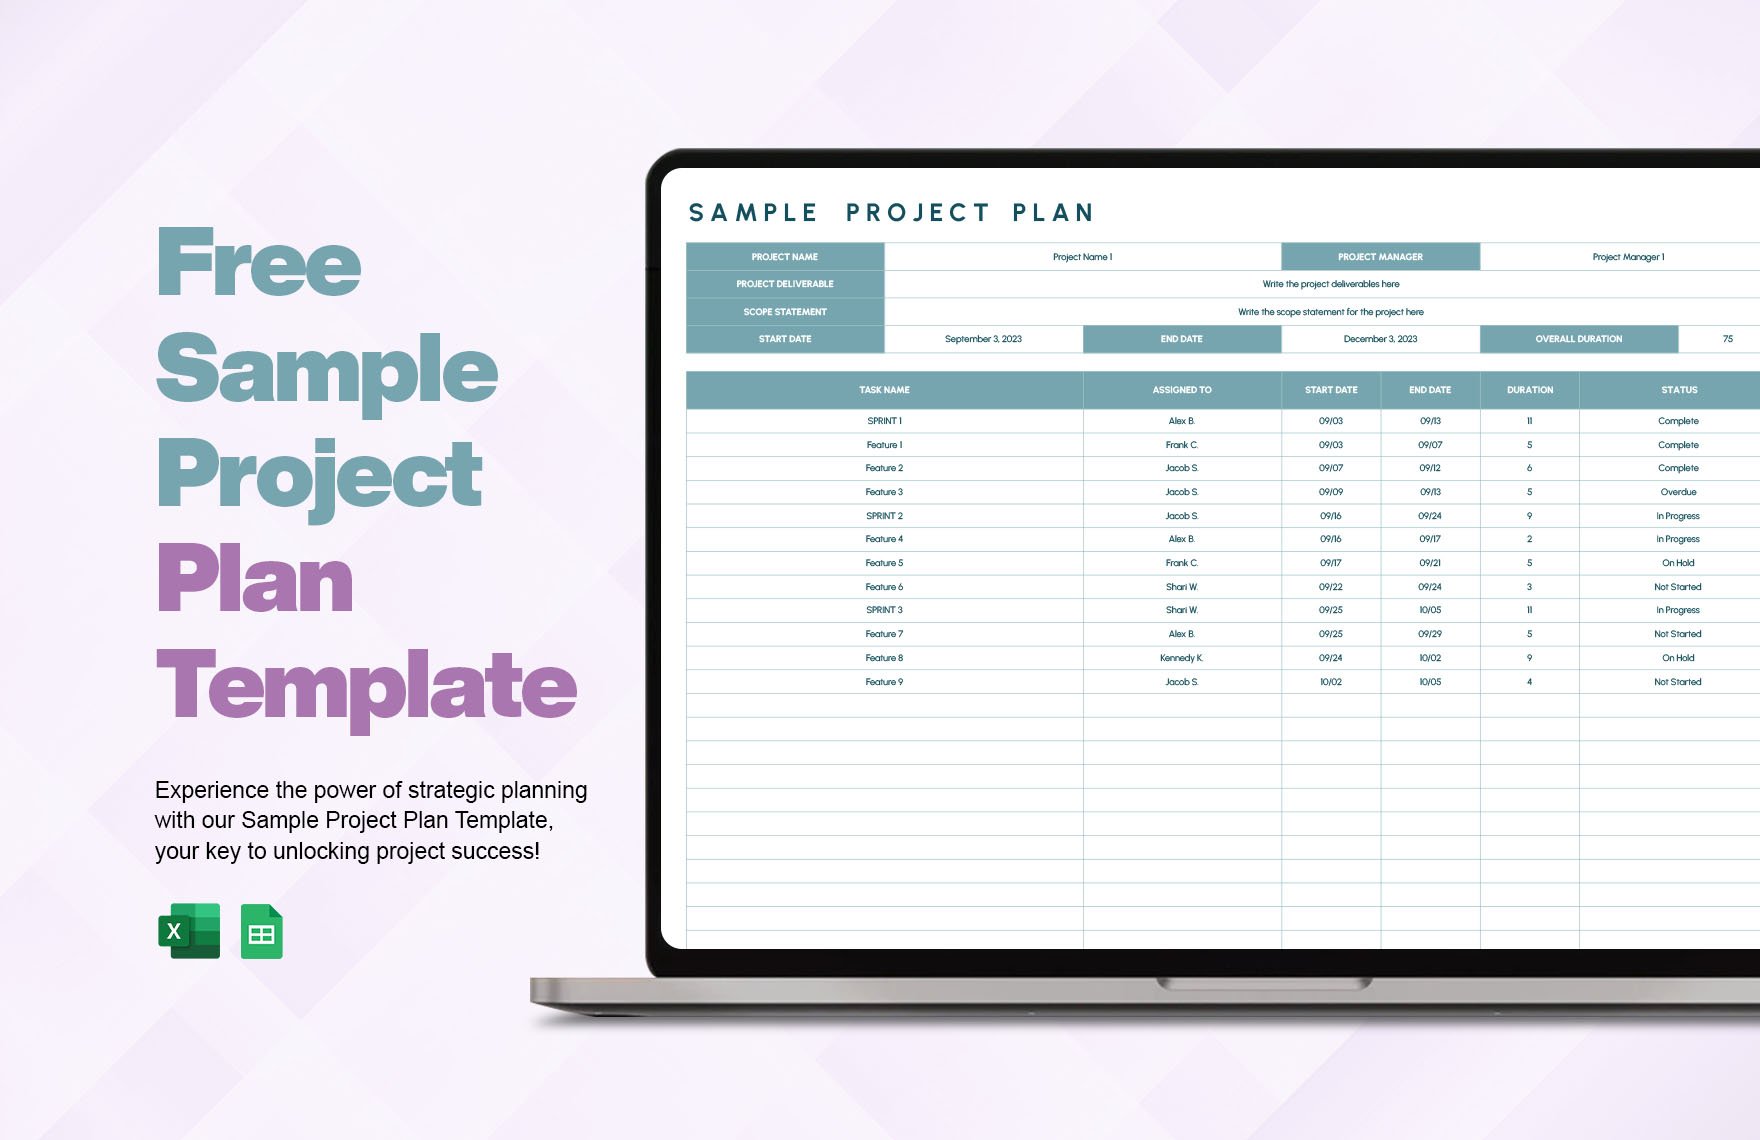 Free Sample Project Plan Template